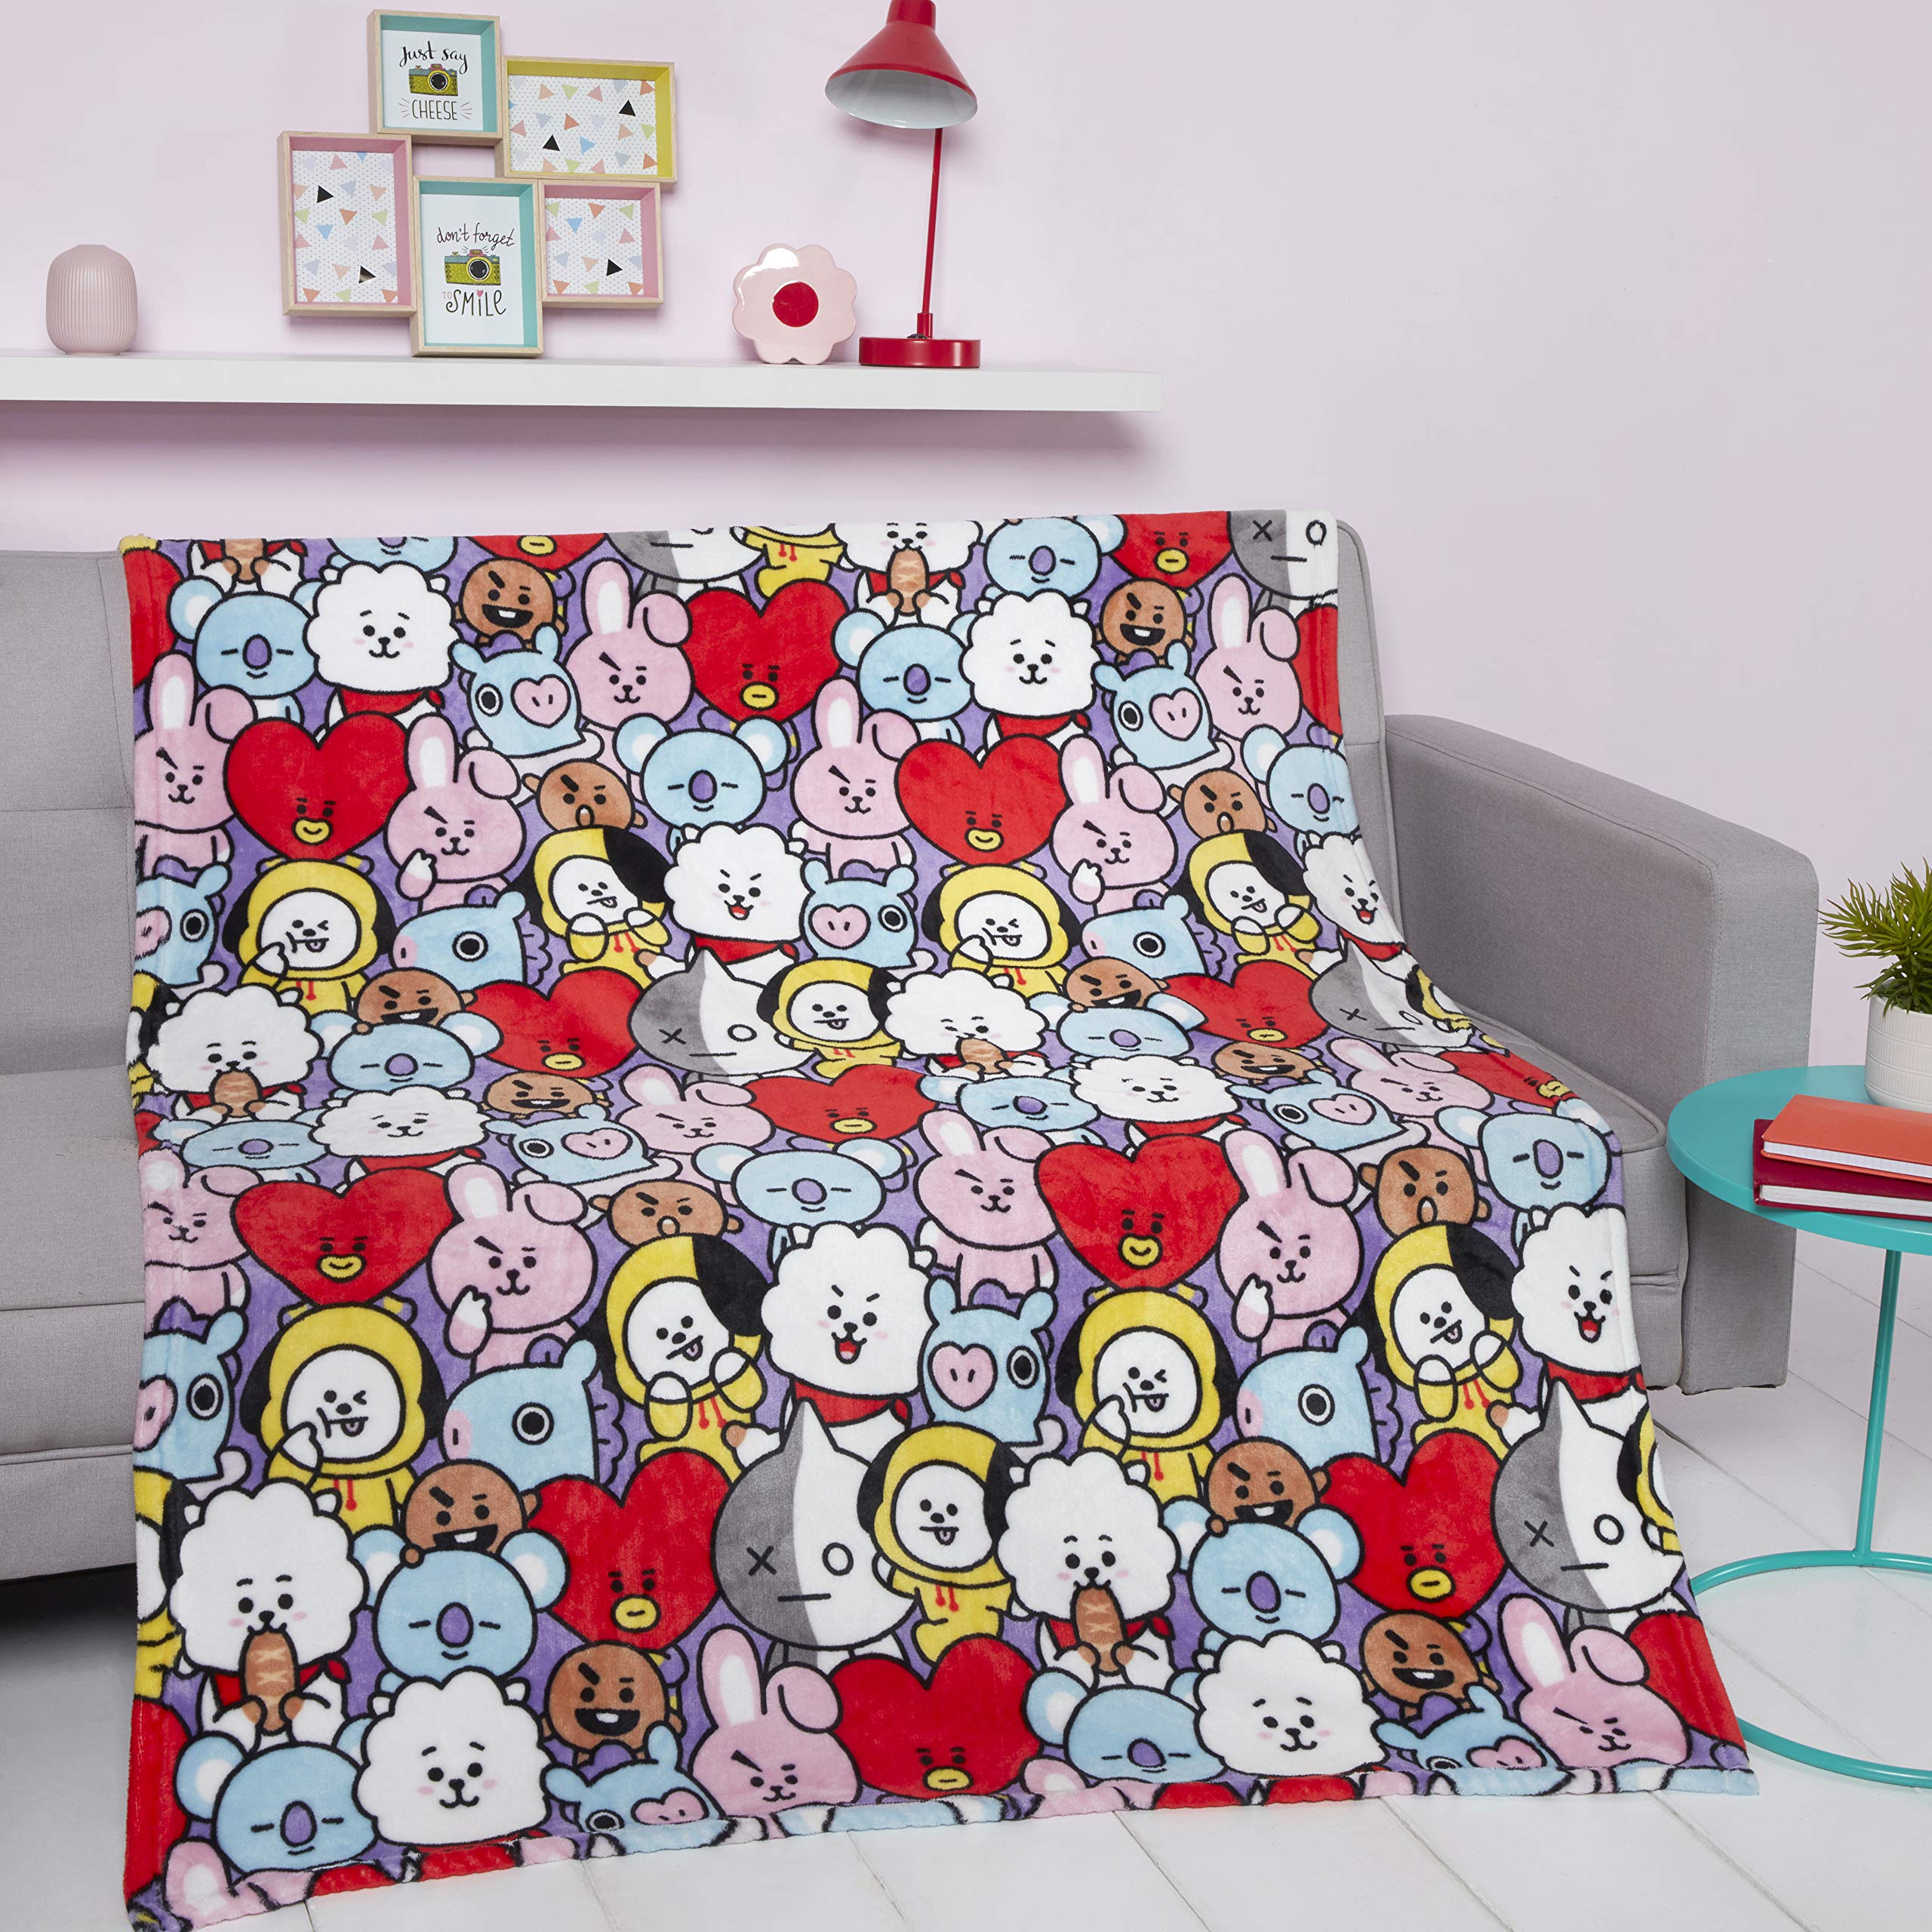 Coco Moon BT21 Group Coral BTS Bed Fleece Blanket Throw Bedding Ideal Anime Enthusiastic Bedroom Accessories Gifts Present